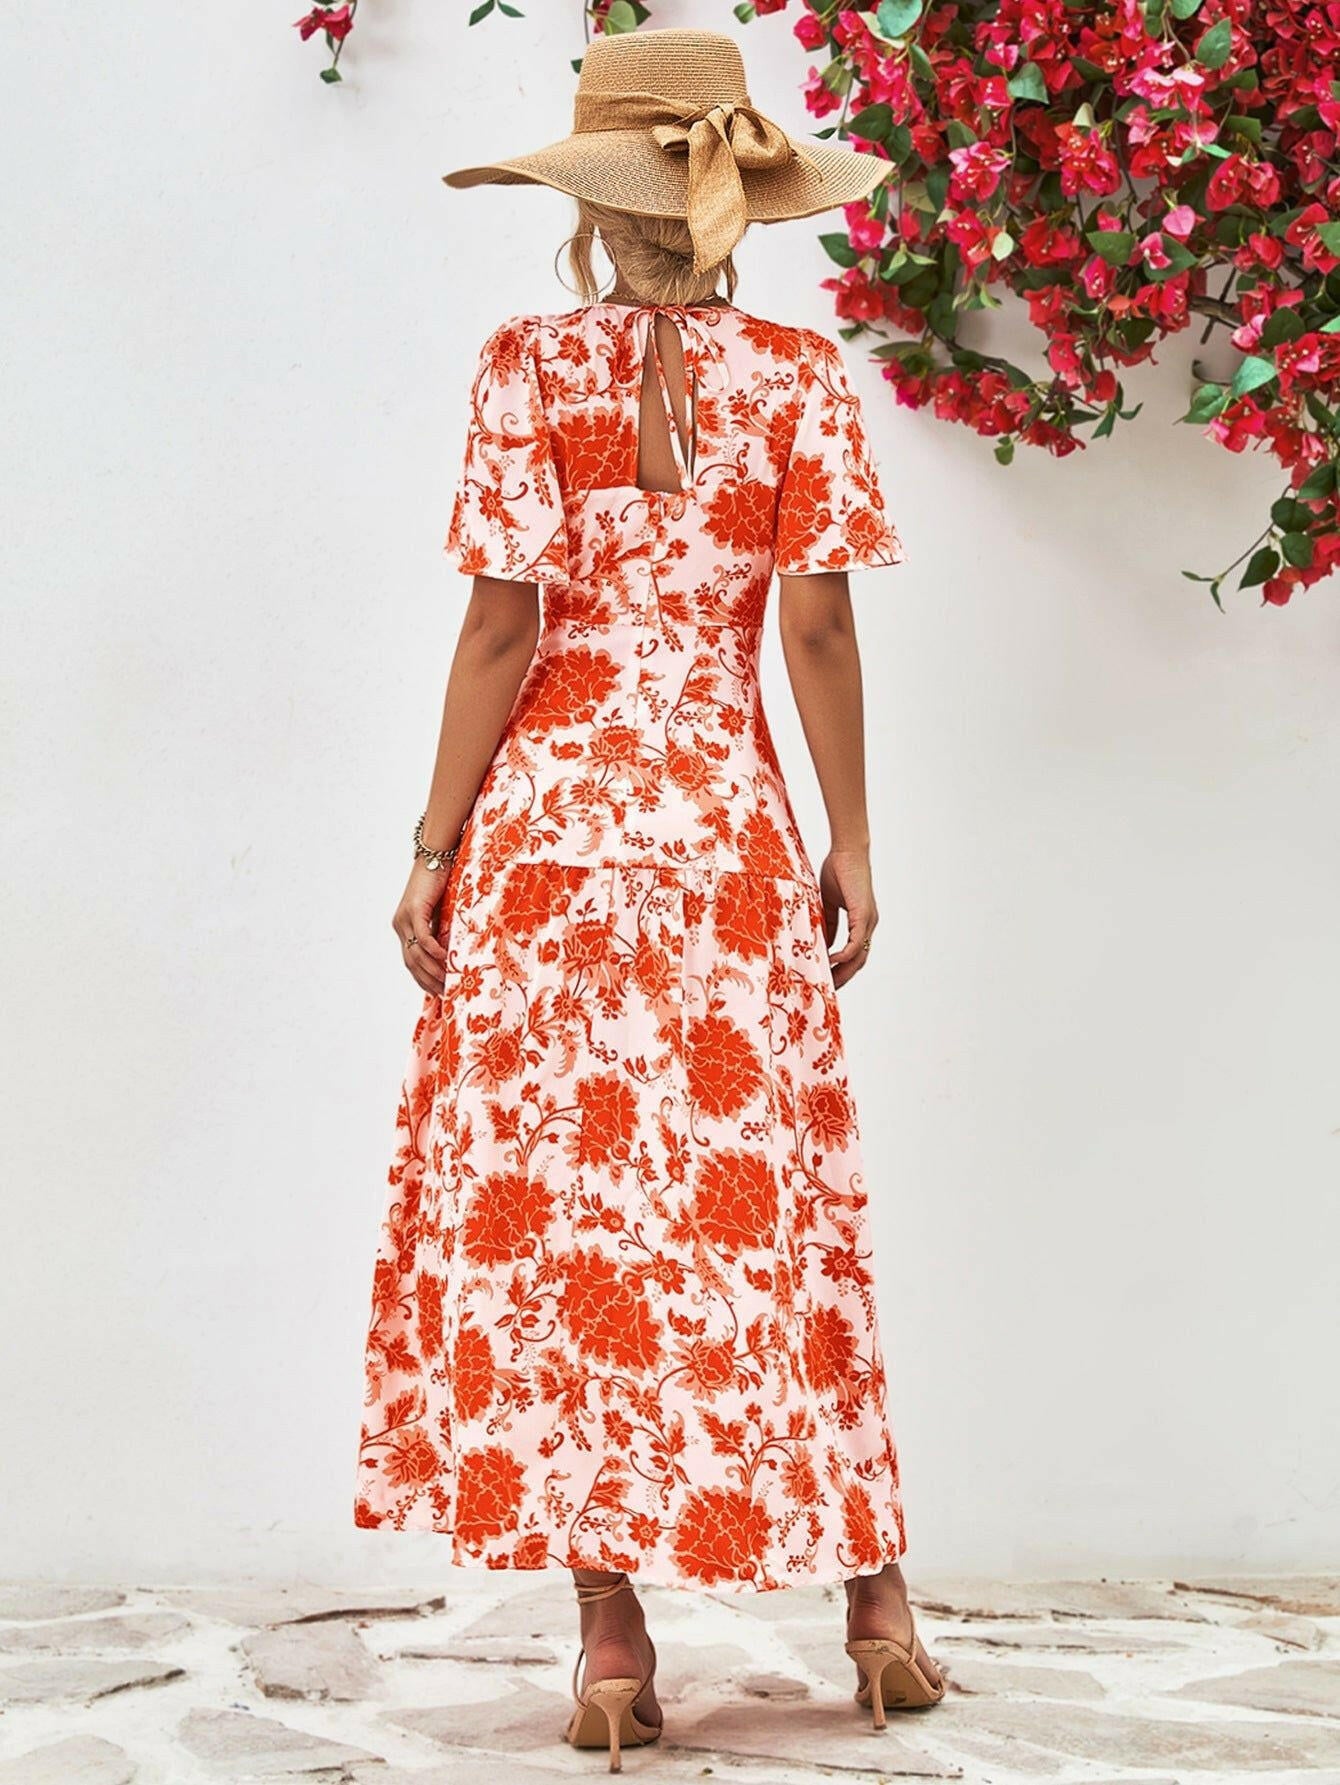 Floral Round Neck Tied Open Back Dress.